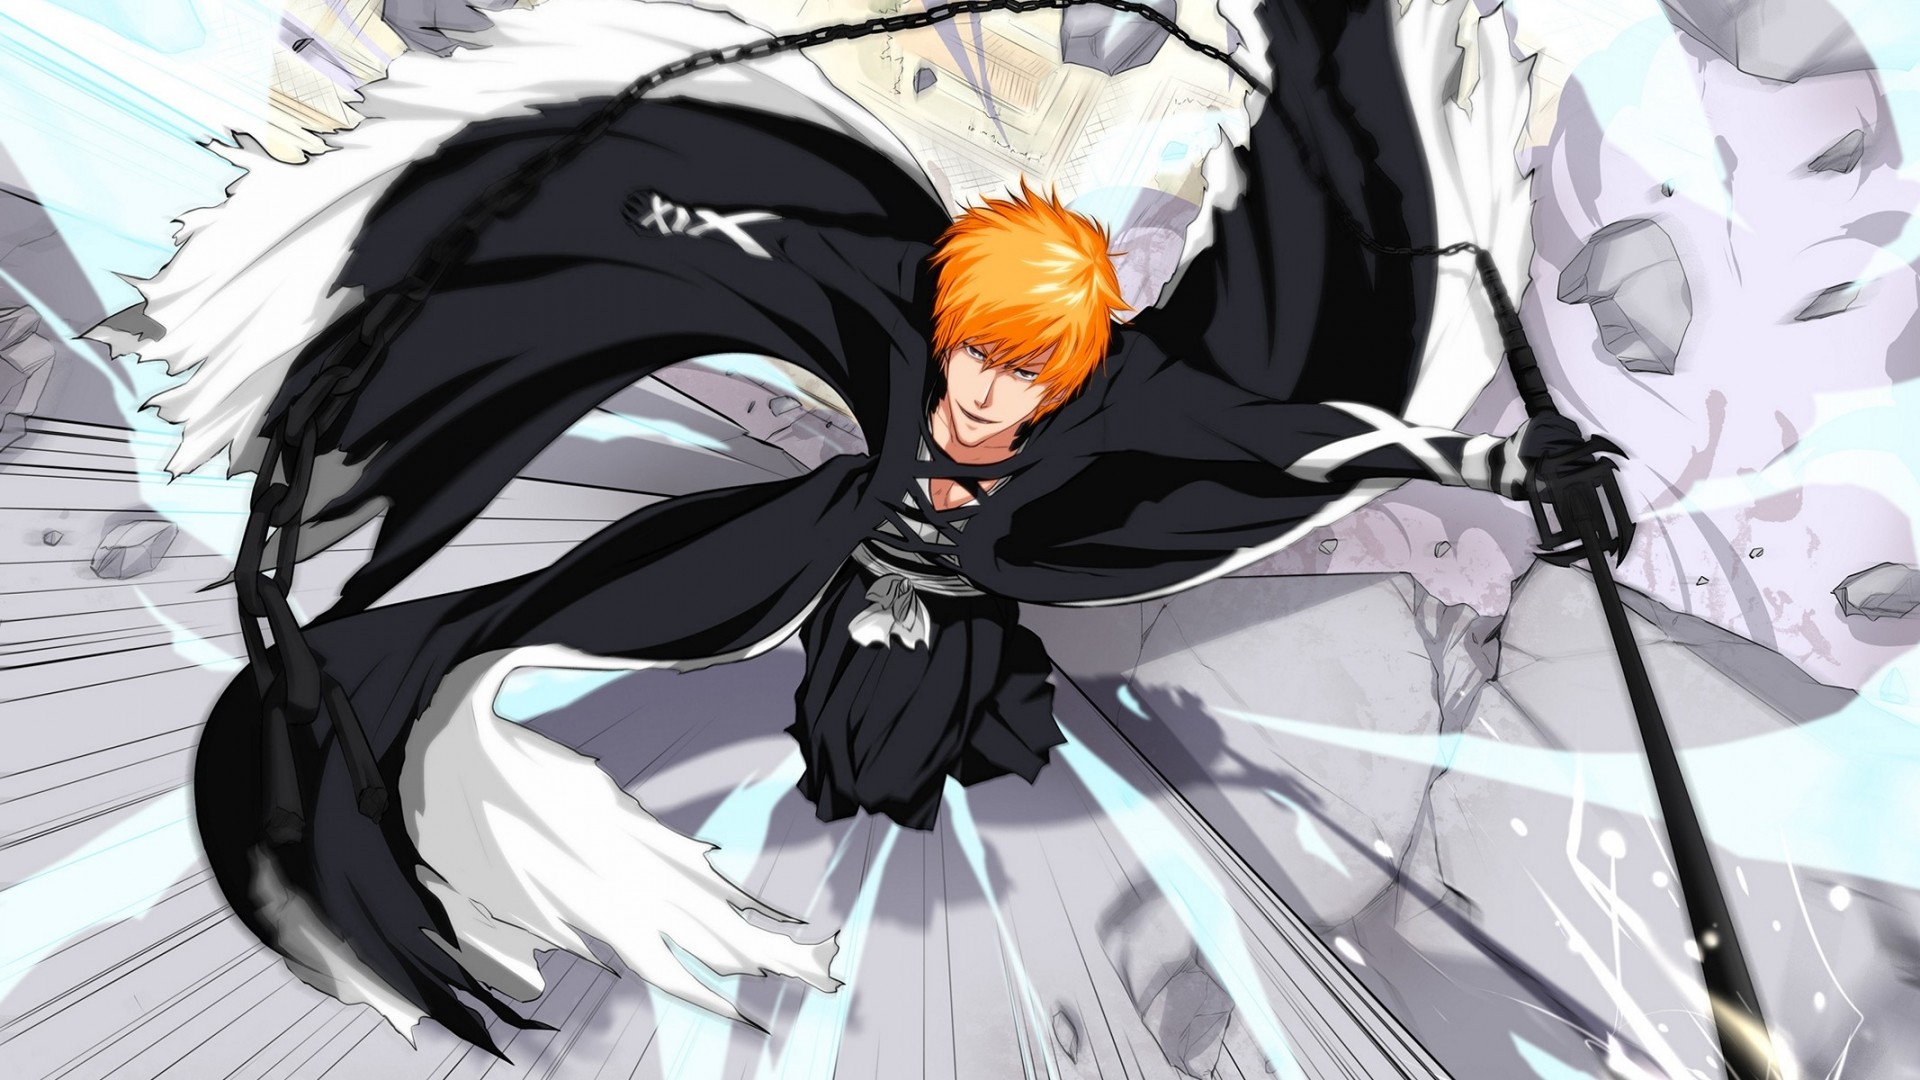 1920x1080 Download Bleach Live Halloween Anime Wallpaper In Many Resolutions